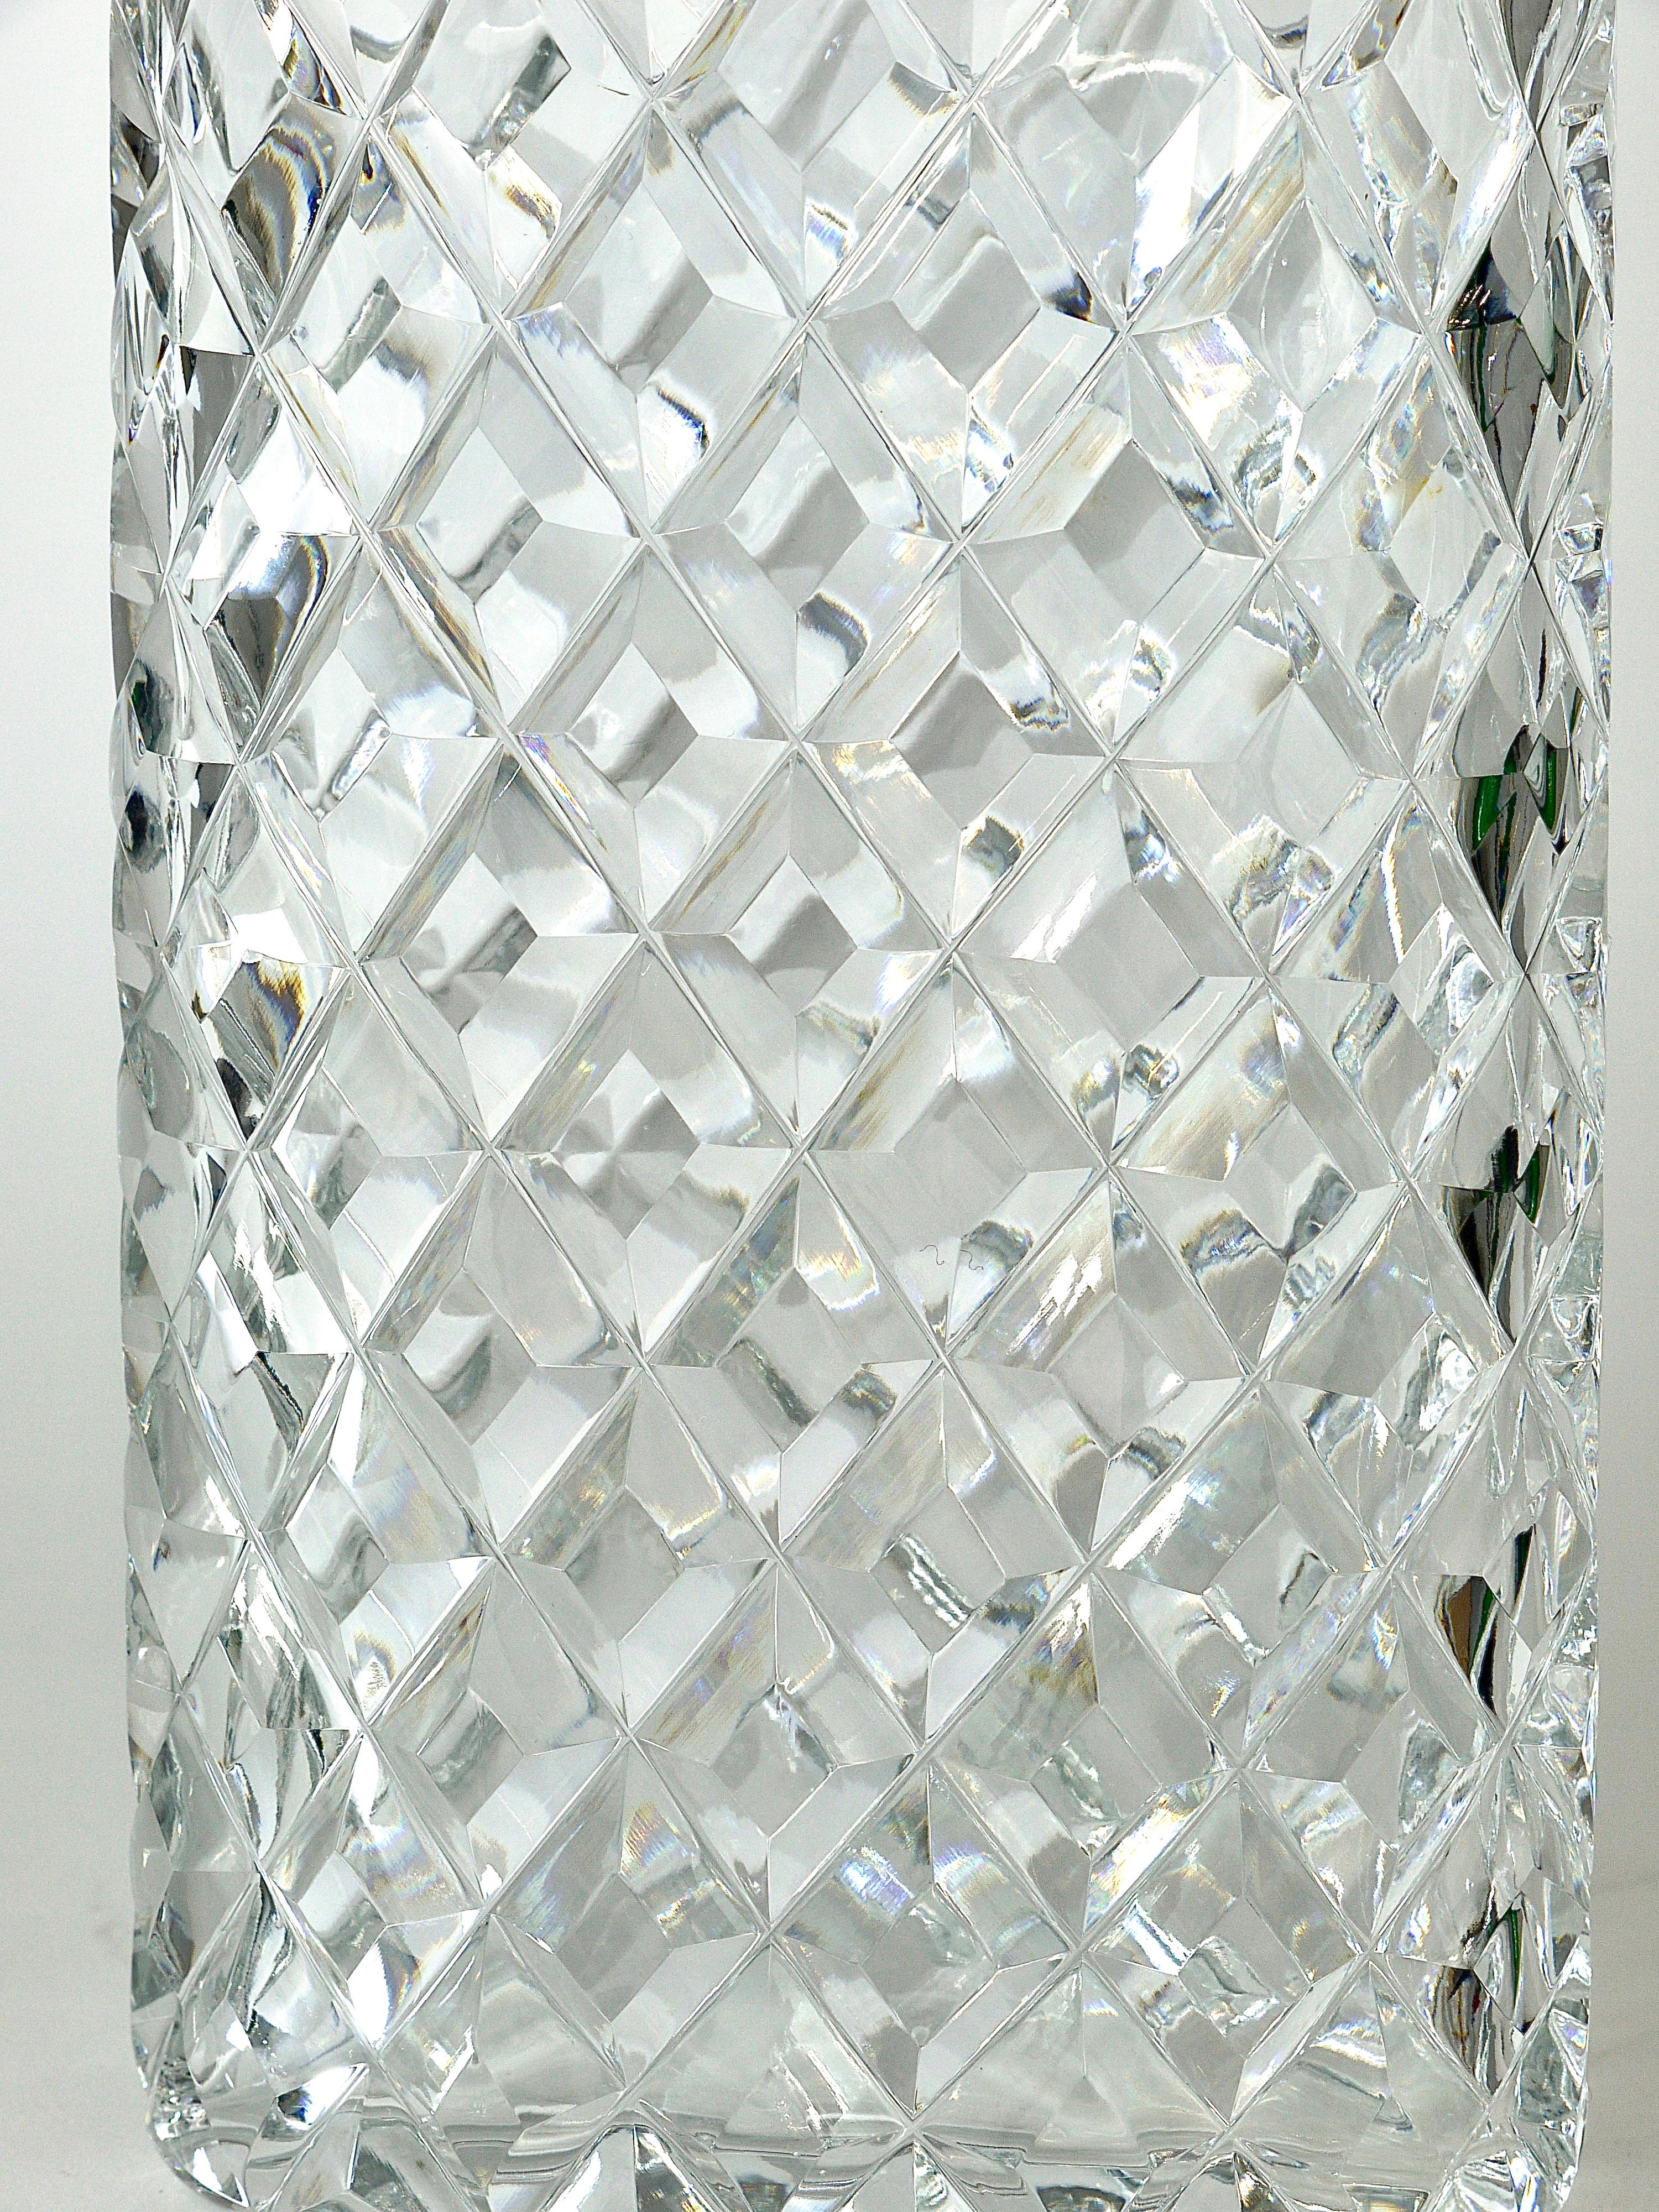 Sparkling Facetted Crystal Glass Vase by Claus Josef Riedel, Austria, 1970s For Sale 2